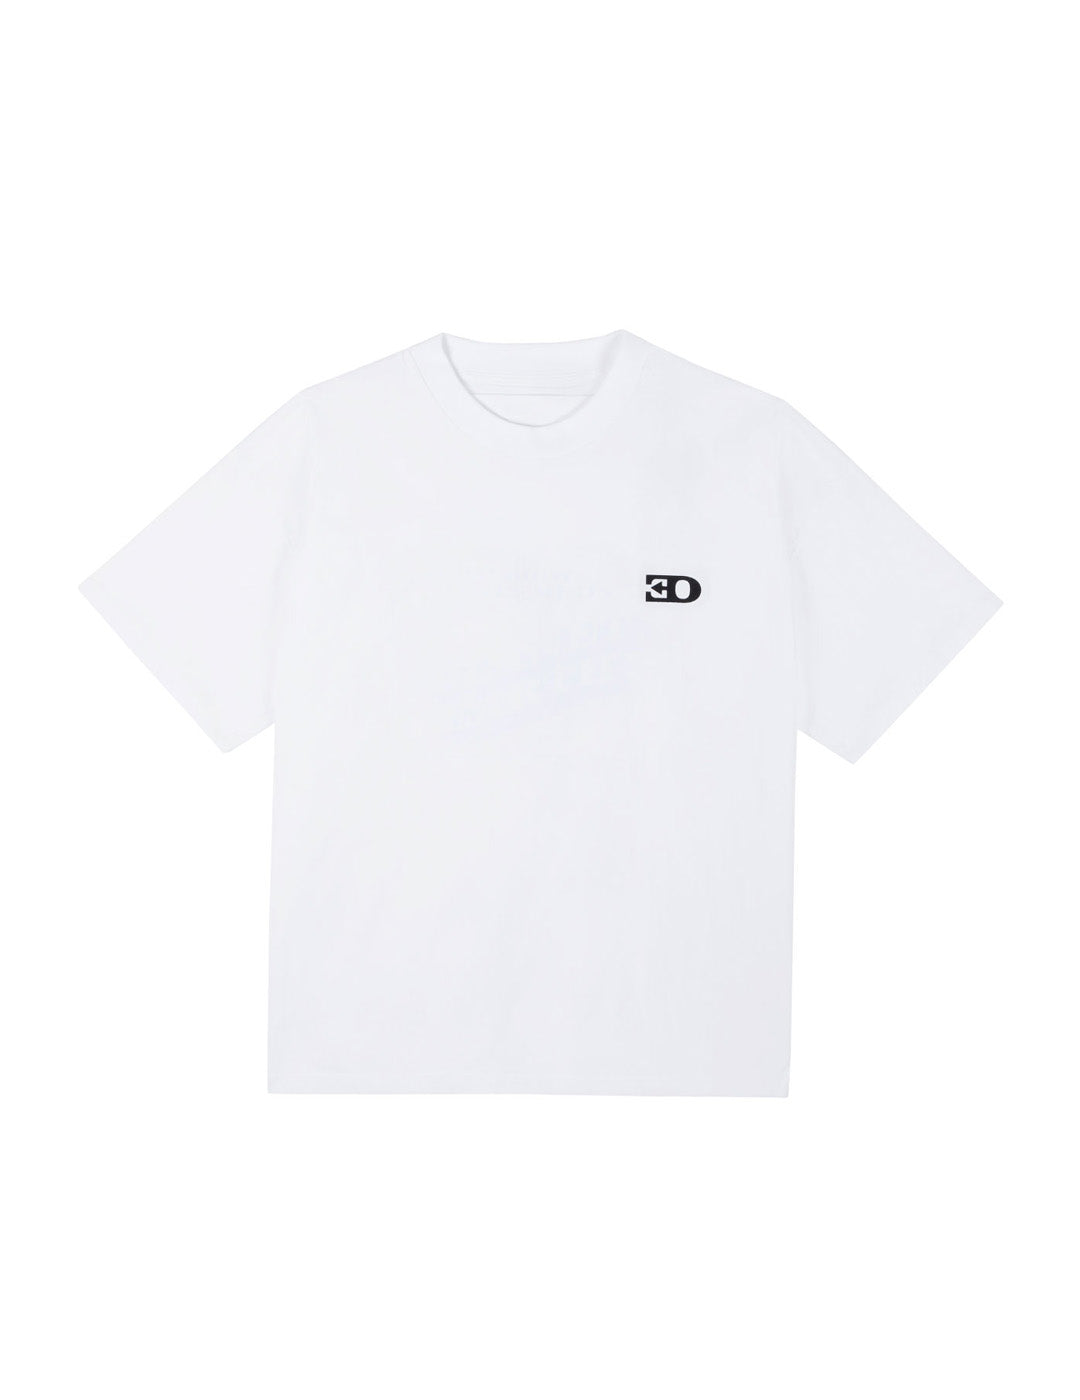 THE LOGO T-SHIRT IN WHITE COTTON